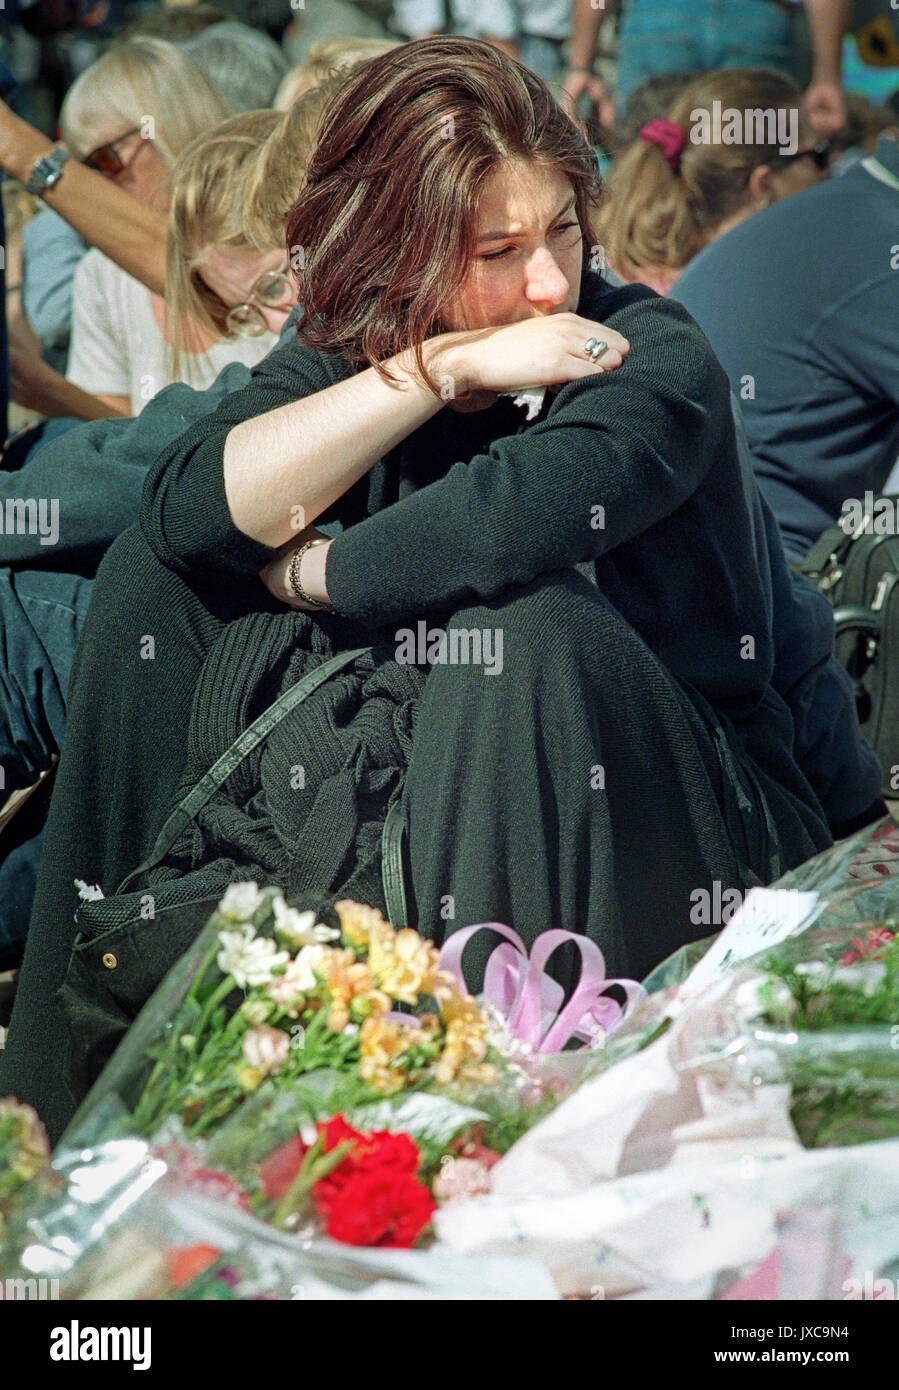 31 August 1997, 4am local time, at the Pitié-Salpêtrière Hospital, Paris. The announcement was made that most famous woman in the world had just died in a tragic car crash in a Parisian tunnel.  Princess Diana's death sent the world into wide spread grief.   Mourners grieve outside Buckingham Palace on the day of her funeral. Stock Photo